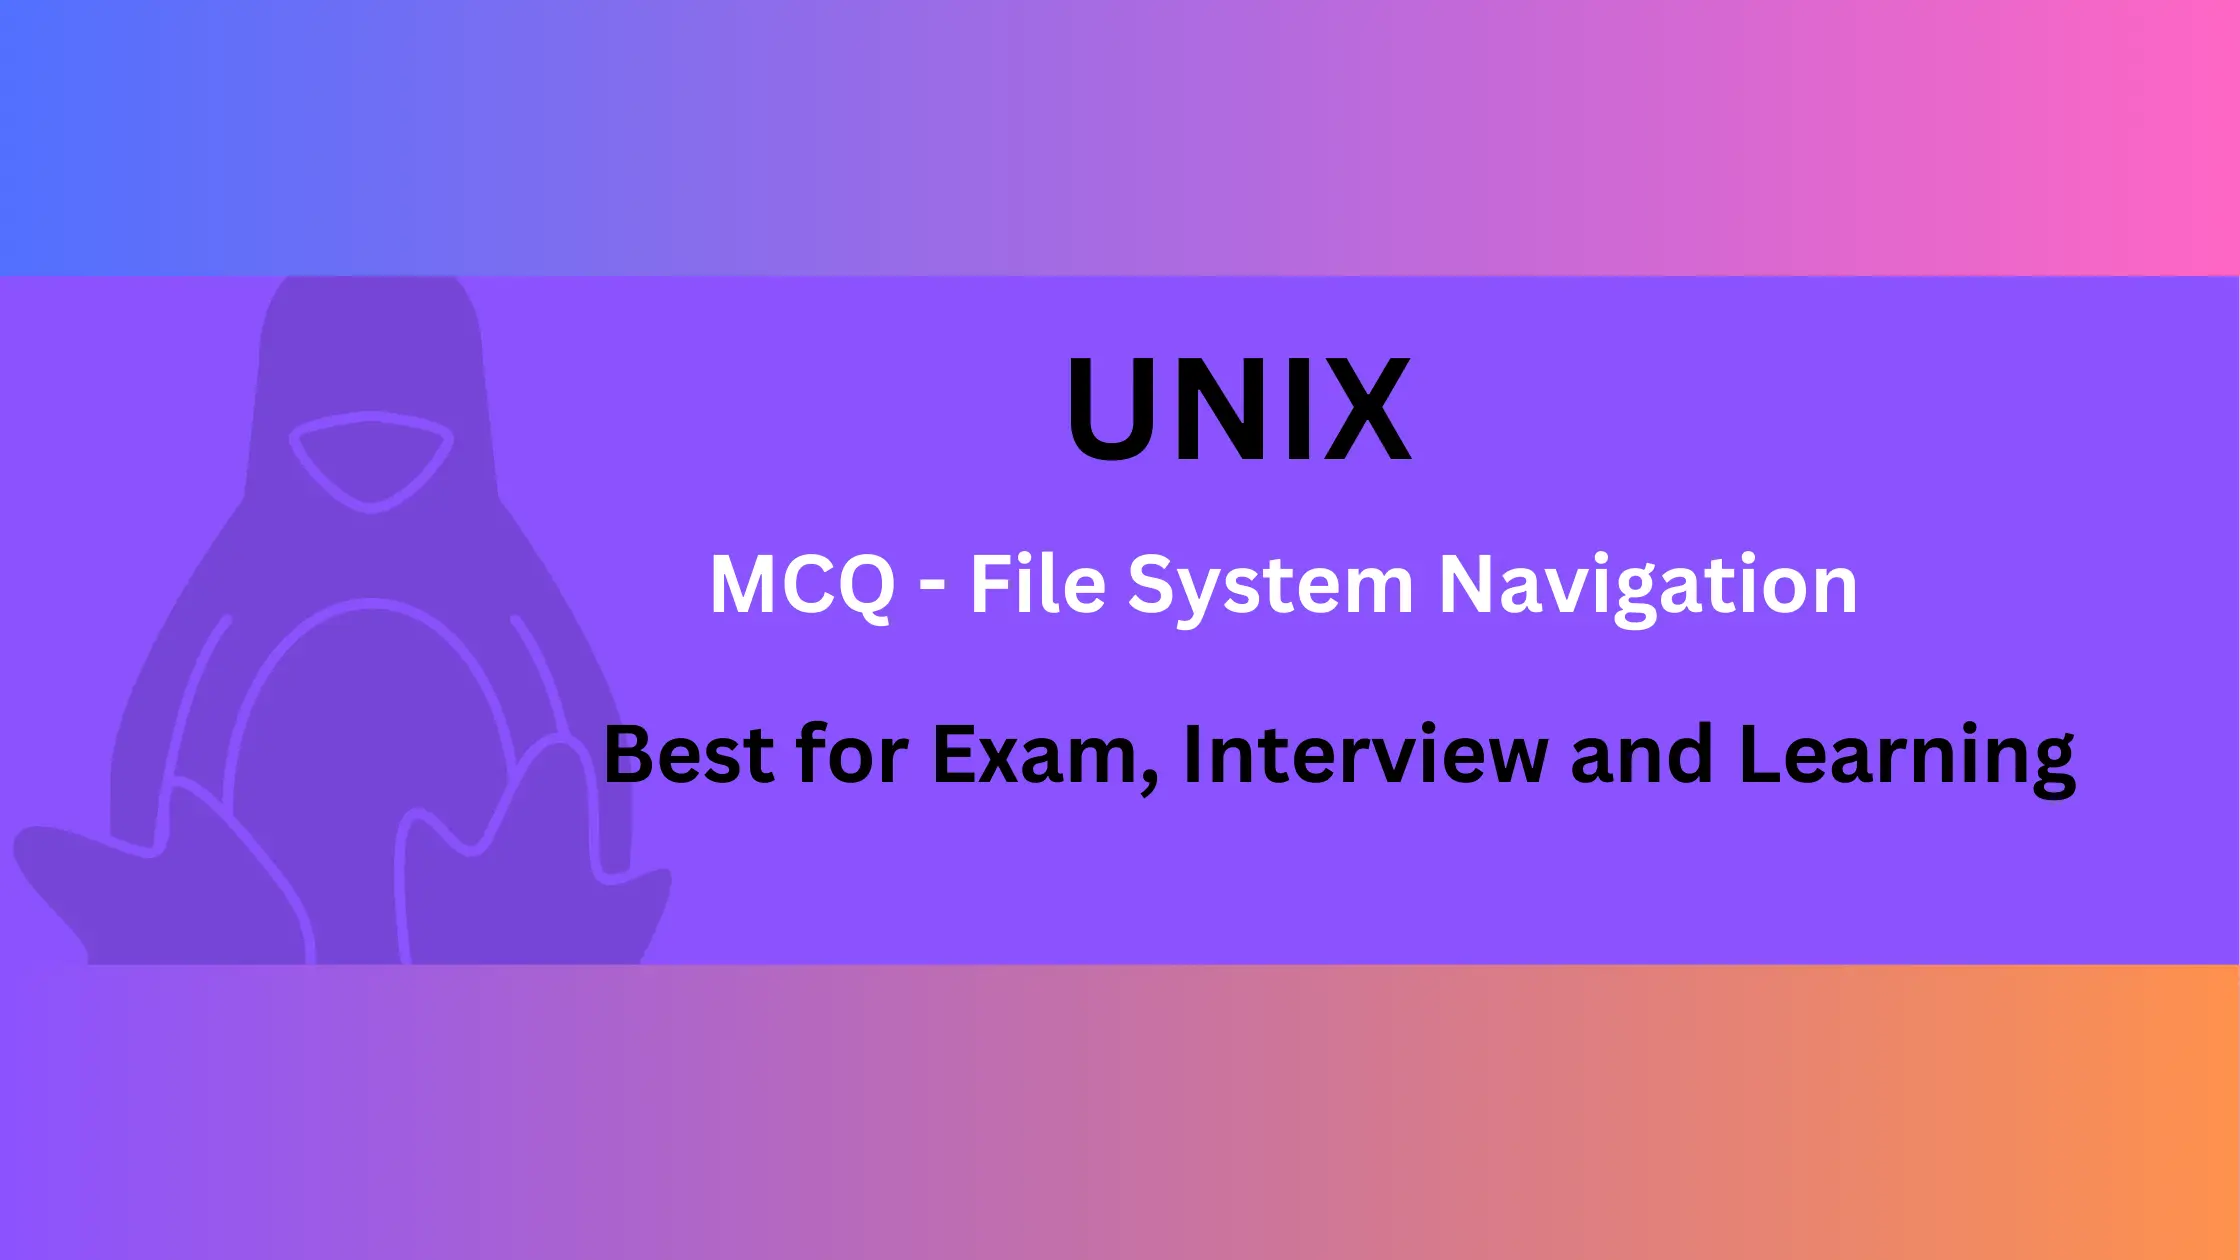 UNIX Questions and answers for File System Navigation